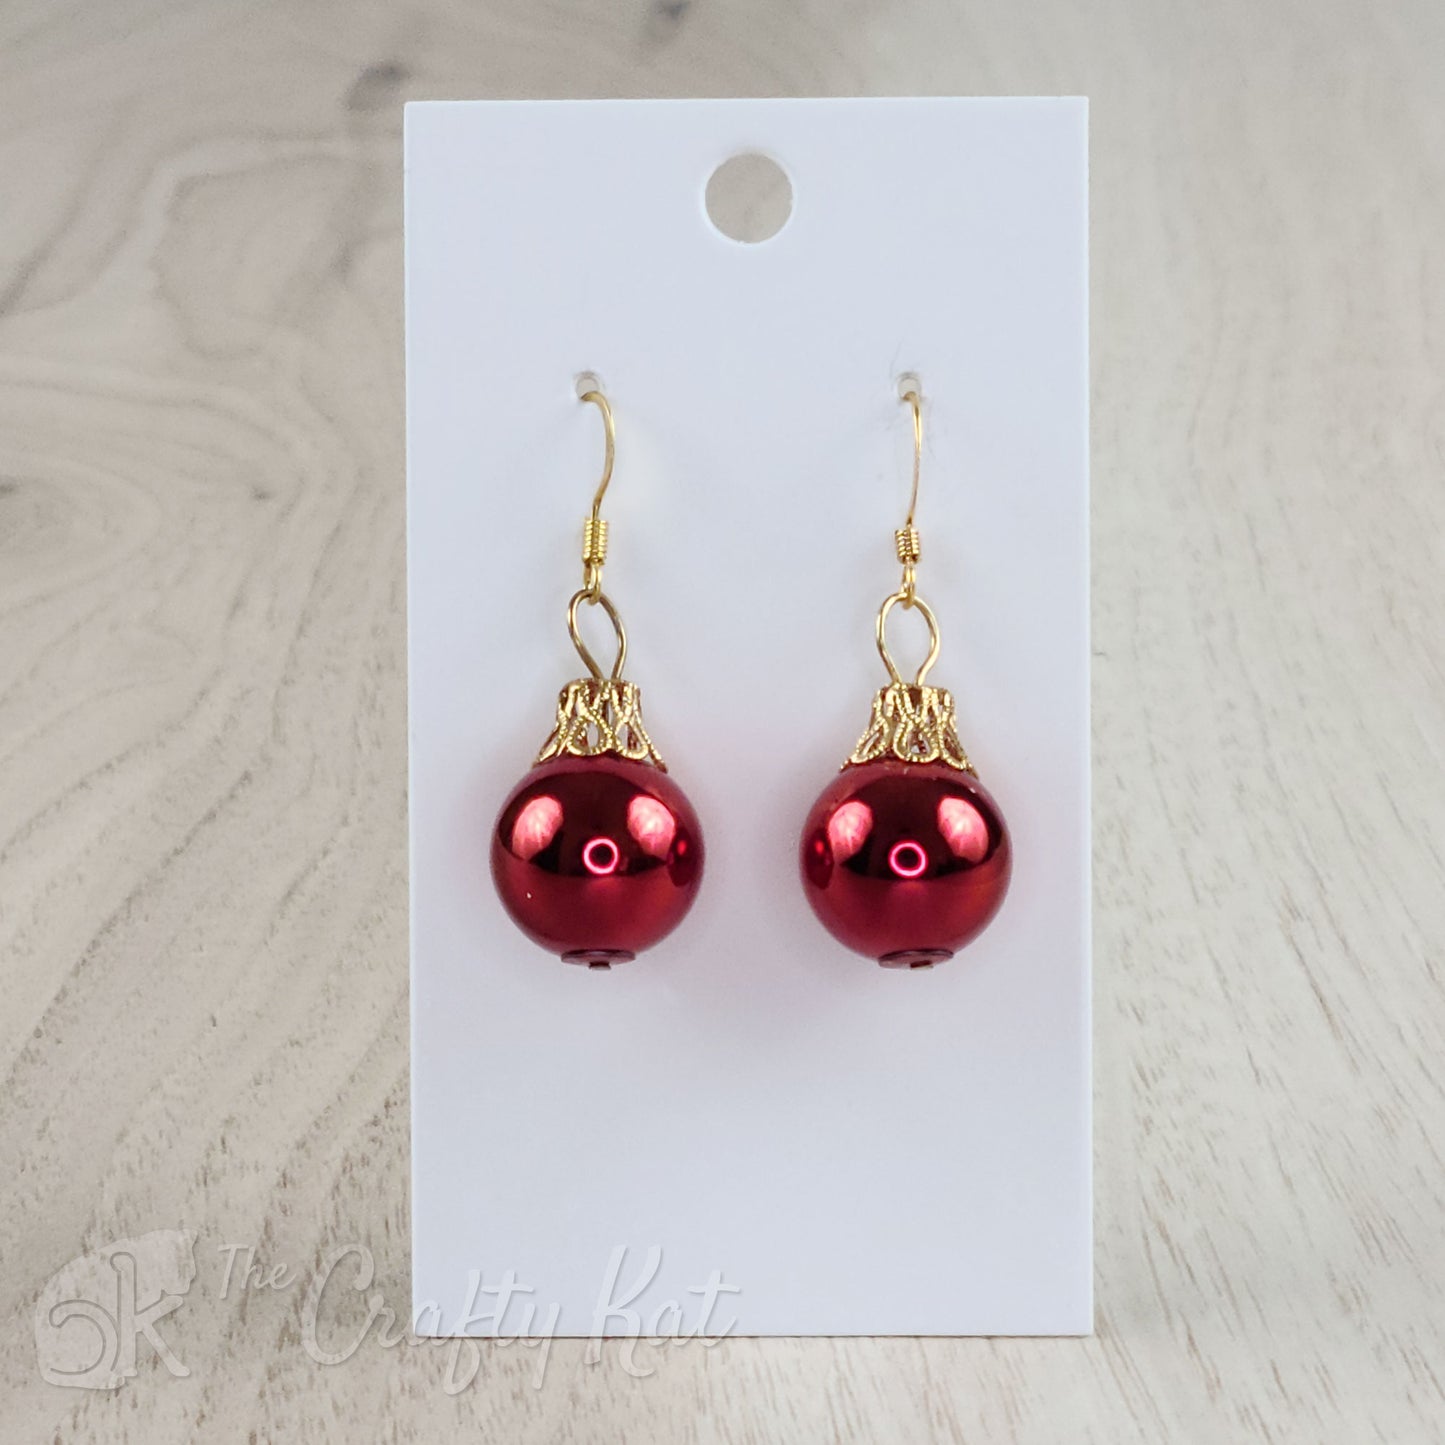 Each earring is a red globe with a gold-plated filigree cap, giving each the appearance of a classic holiday tree ornament.